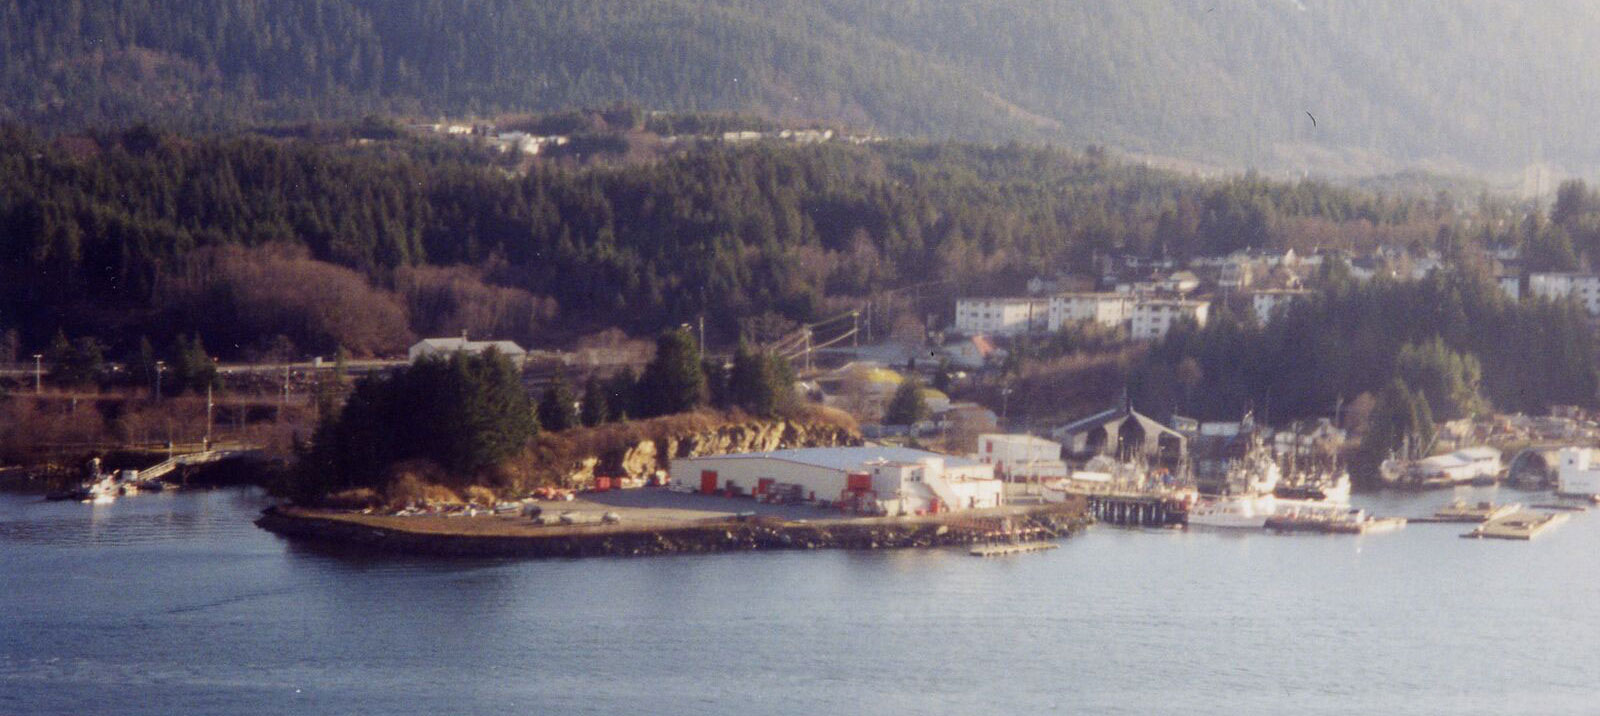 Aerial view of Seal Cove Cannery buildings with water in the foreground and wooded hills in the background